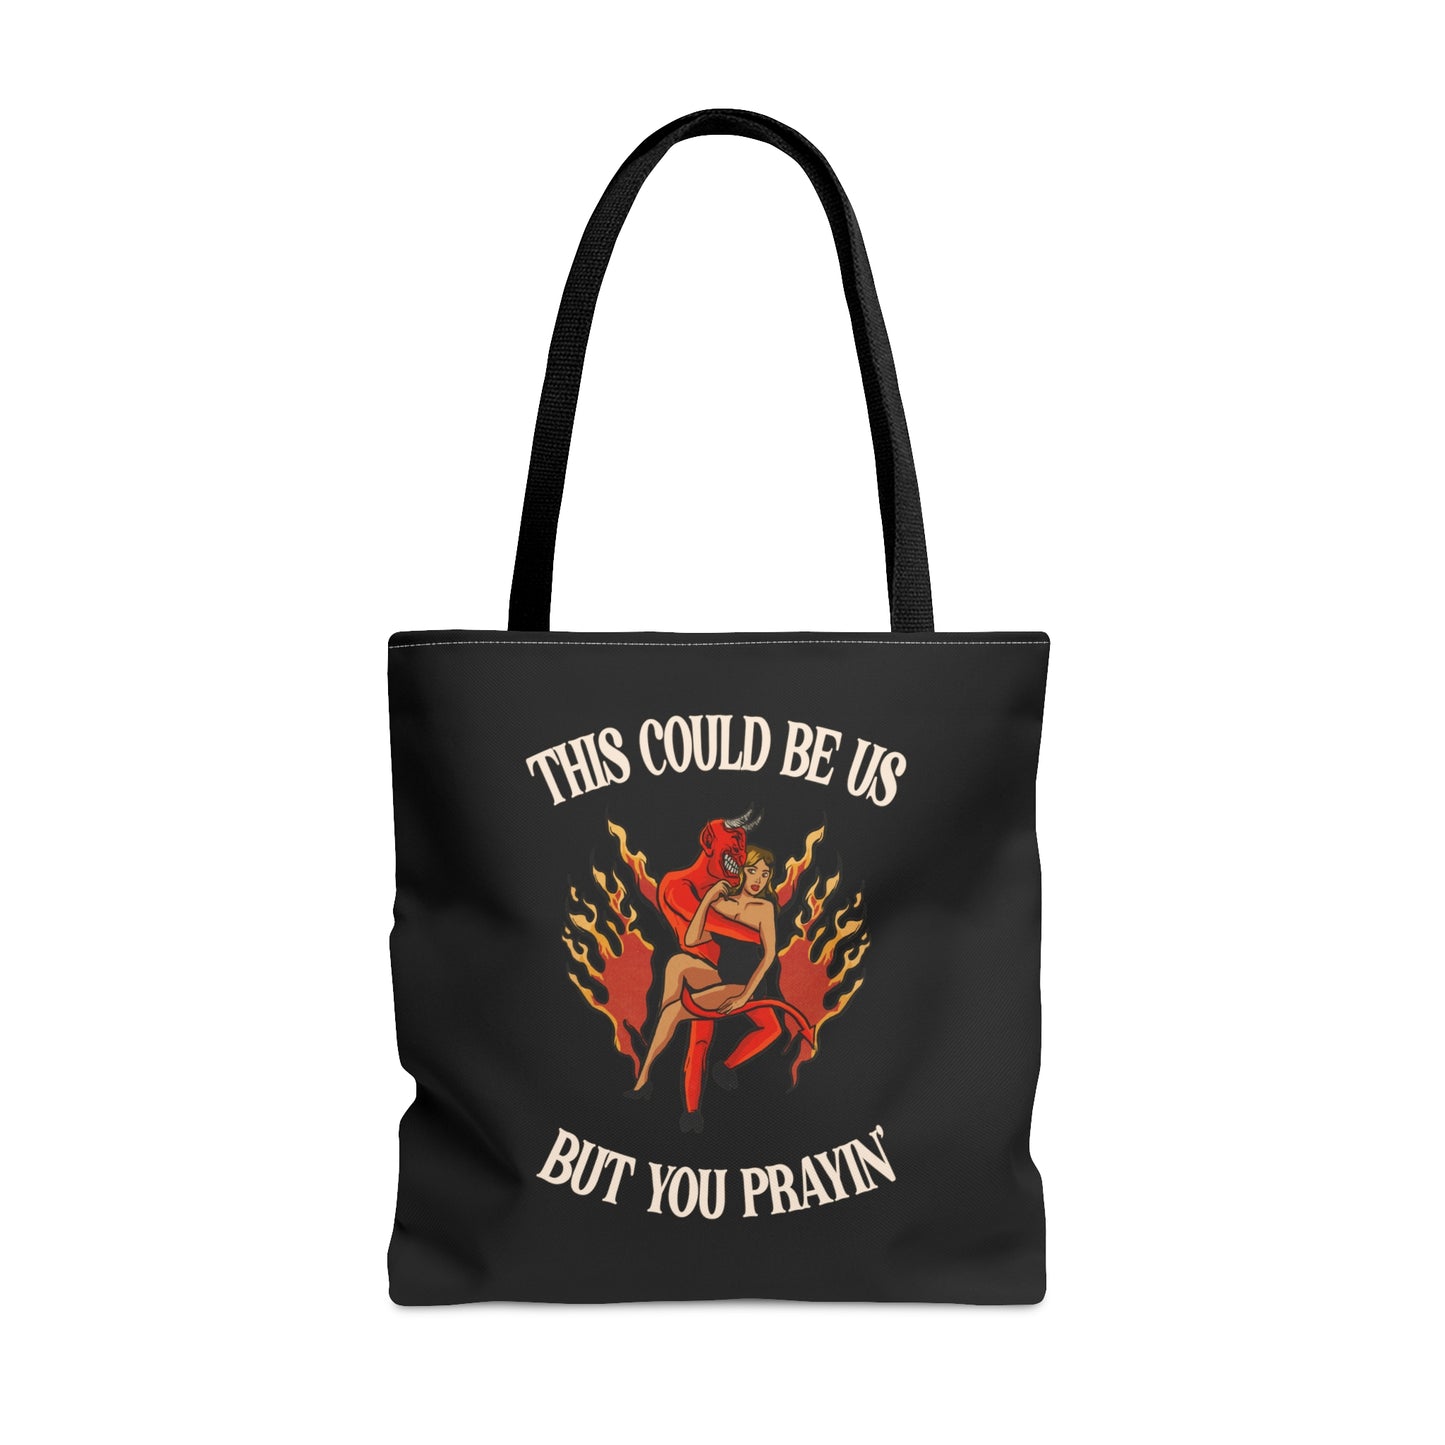 This Could Be Us Tote Bag